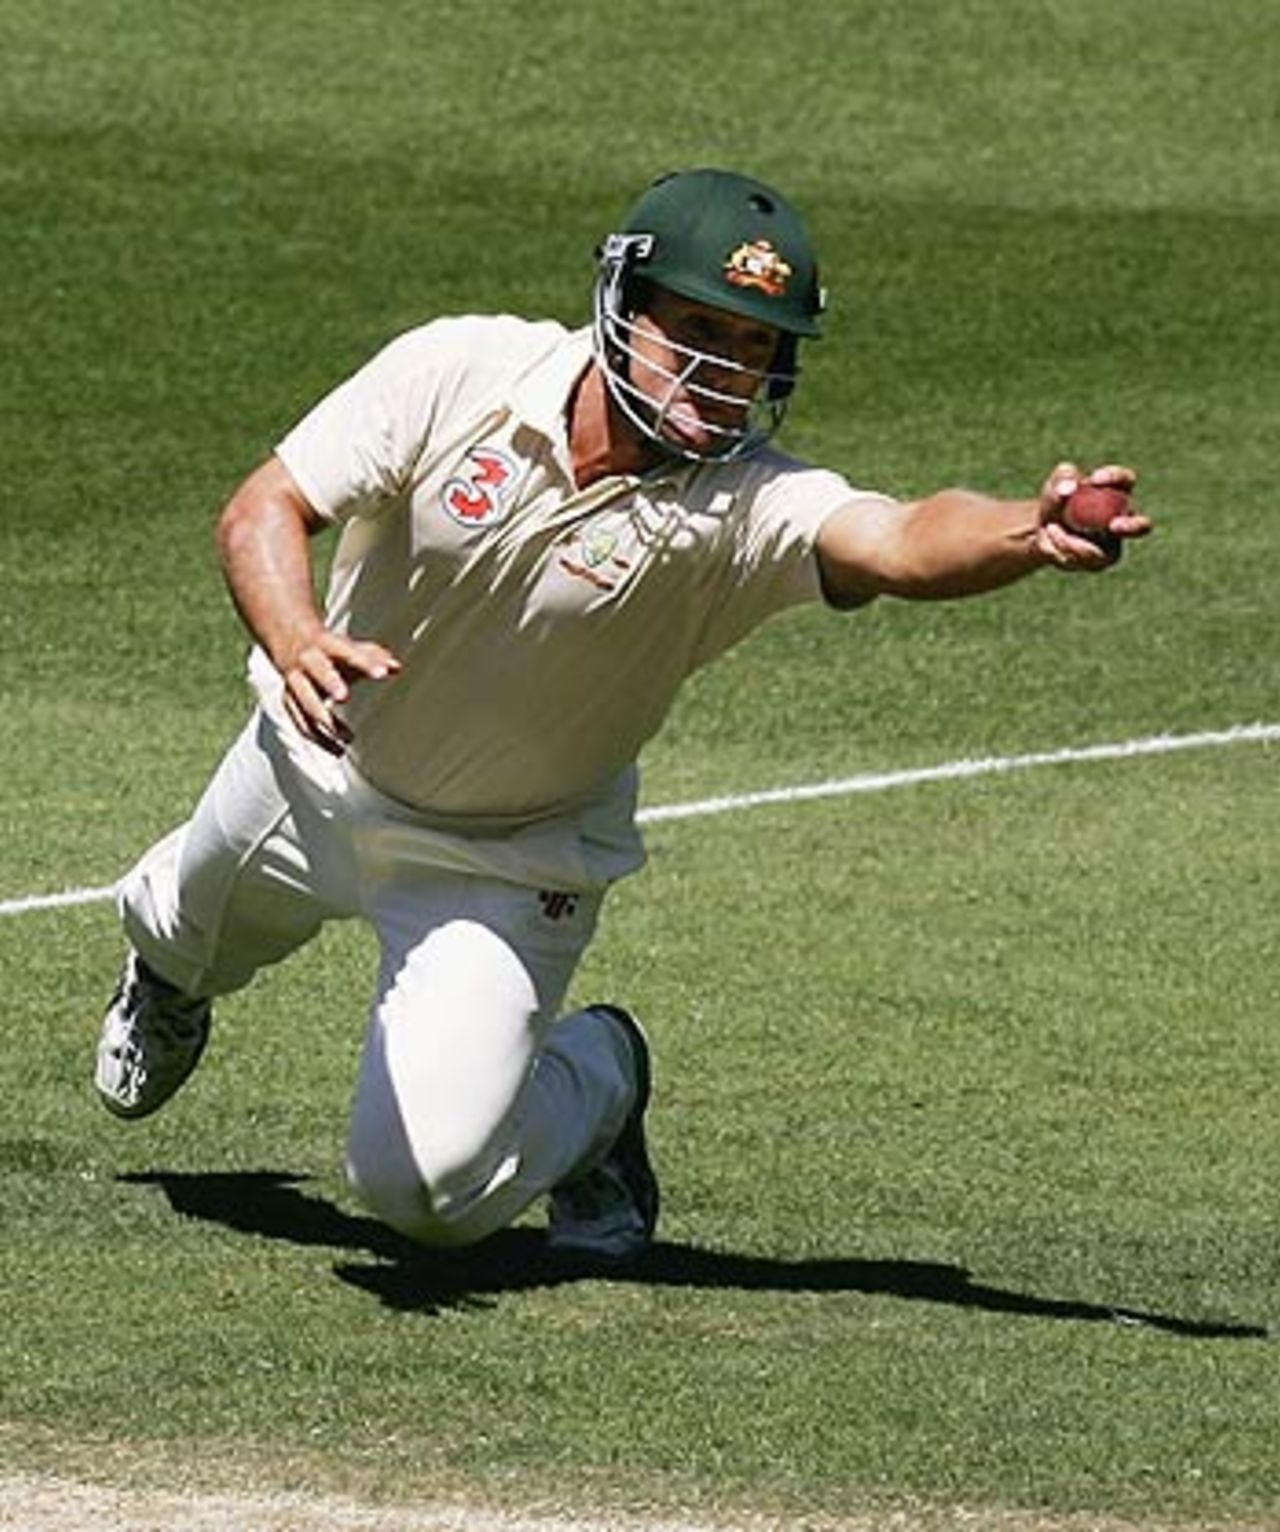 Phil Jaques pulls off an athletic stop close-in, Australia v South Africa, 2nd Test, Melbourne, 4th day, December 30, 2005